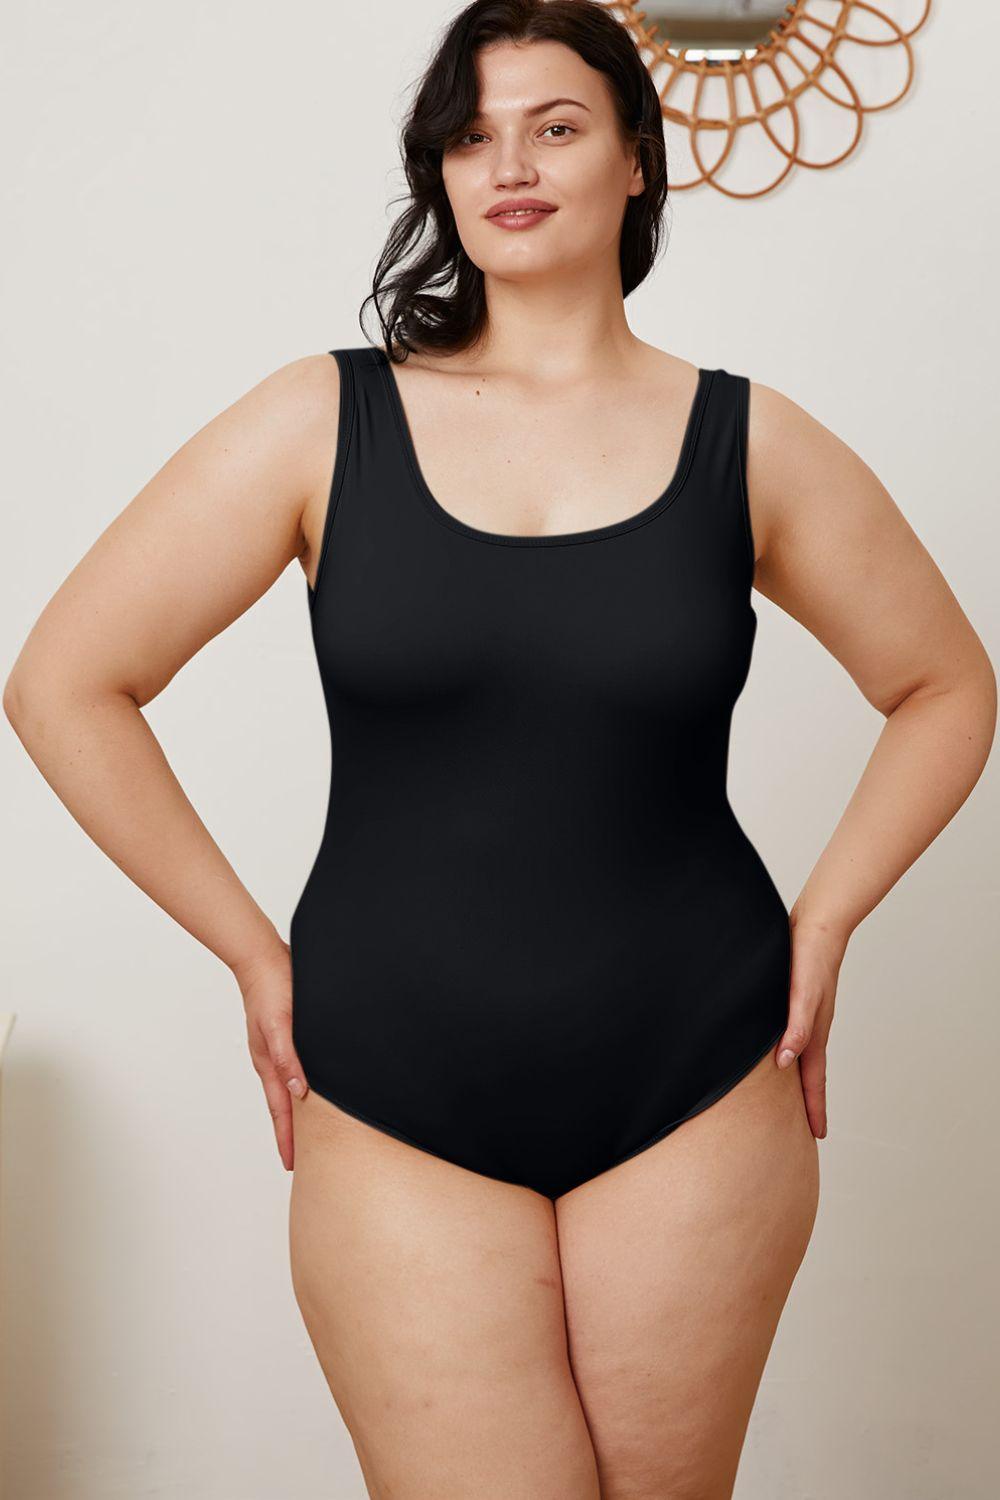 a woman in a black swimsuit posing for a picture